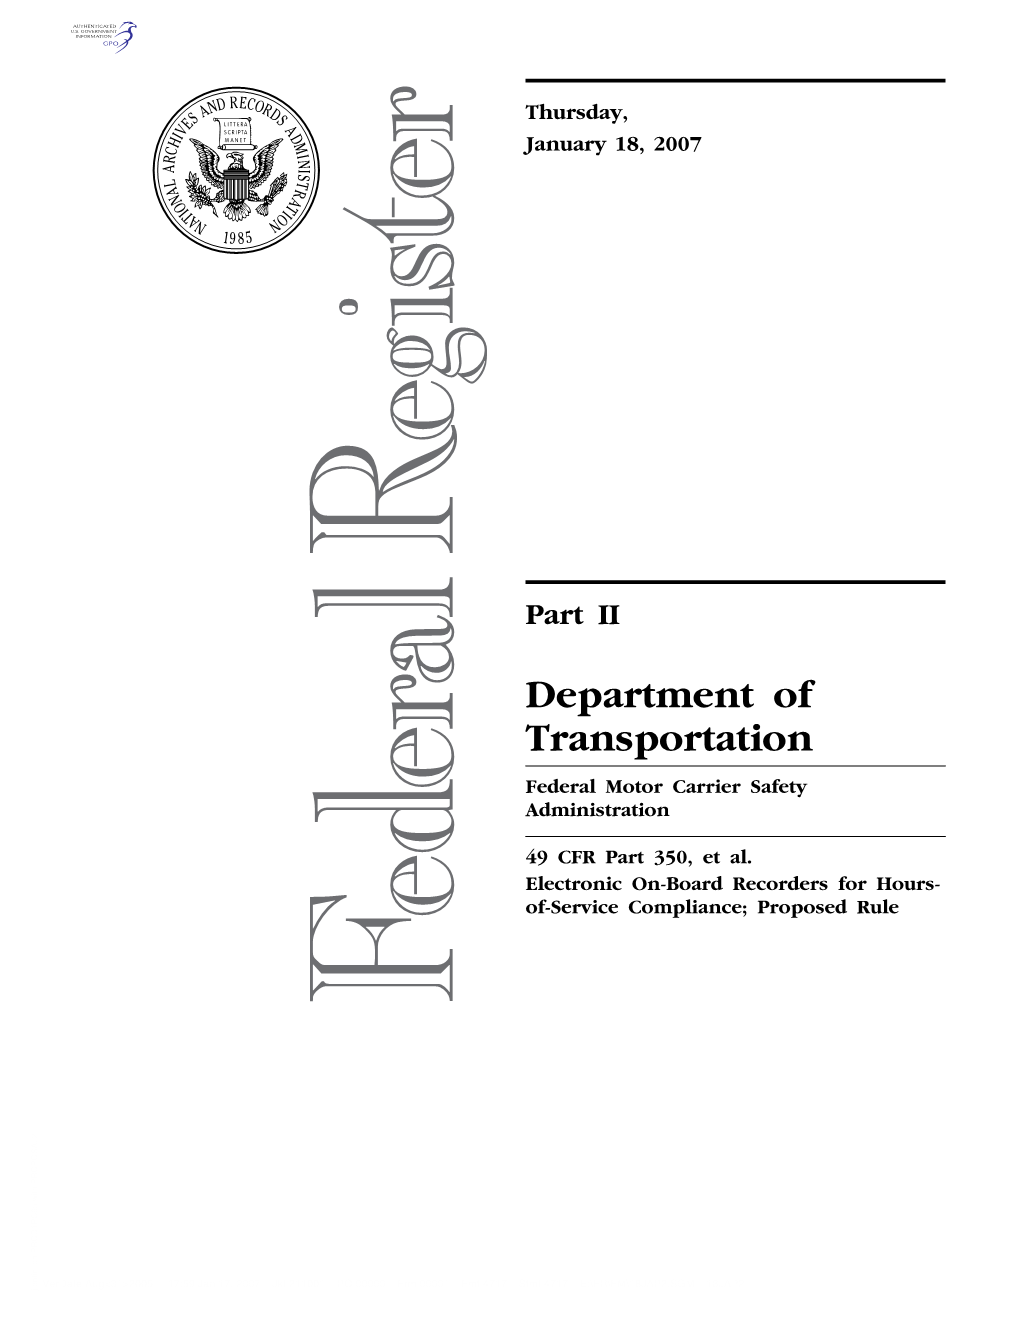 Department of Transportation Federal Motor Carrier Safety Administration